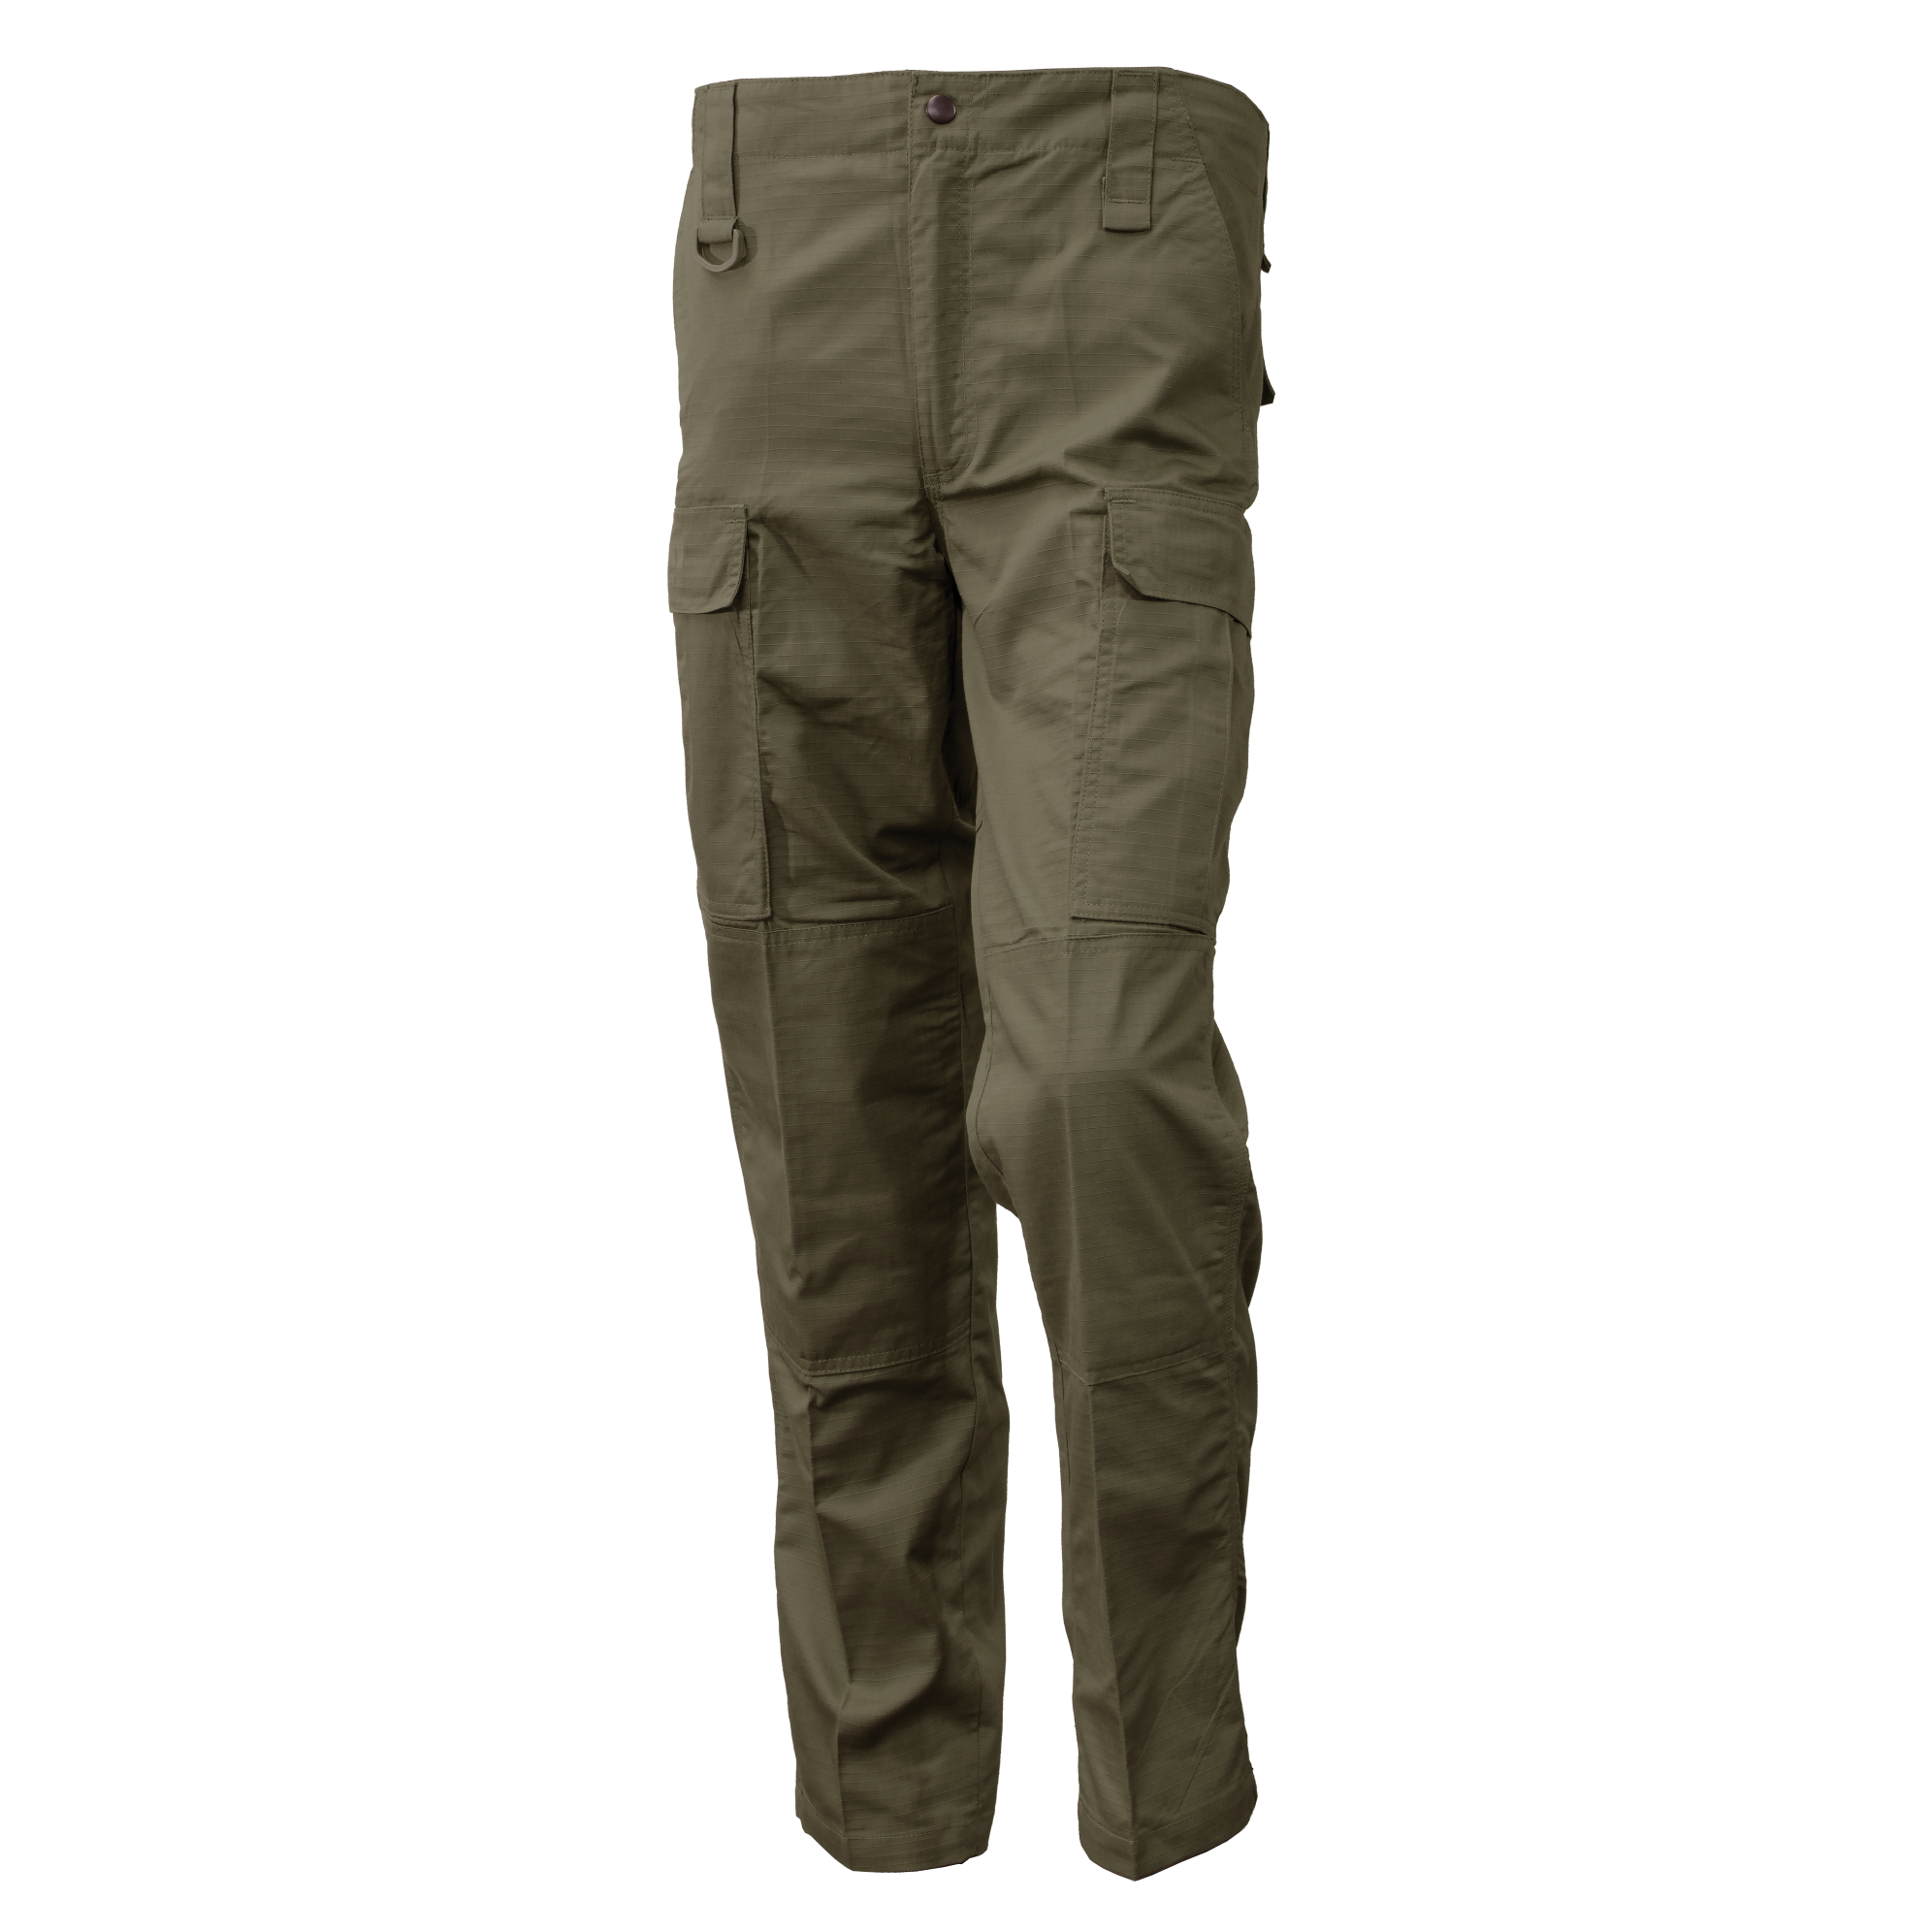 Tippmann Tactical TDU Pants - Olive - Eminent Paintball And Airsoft